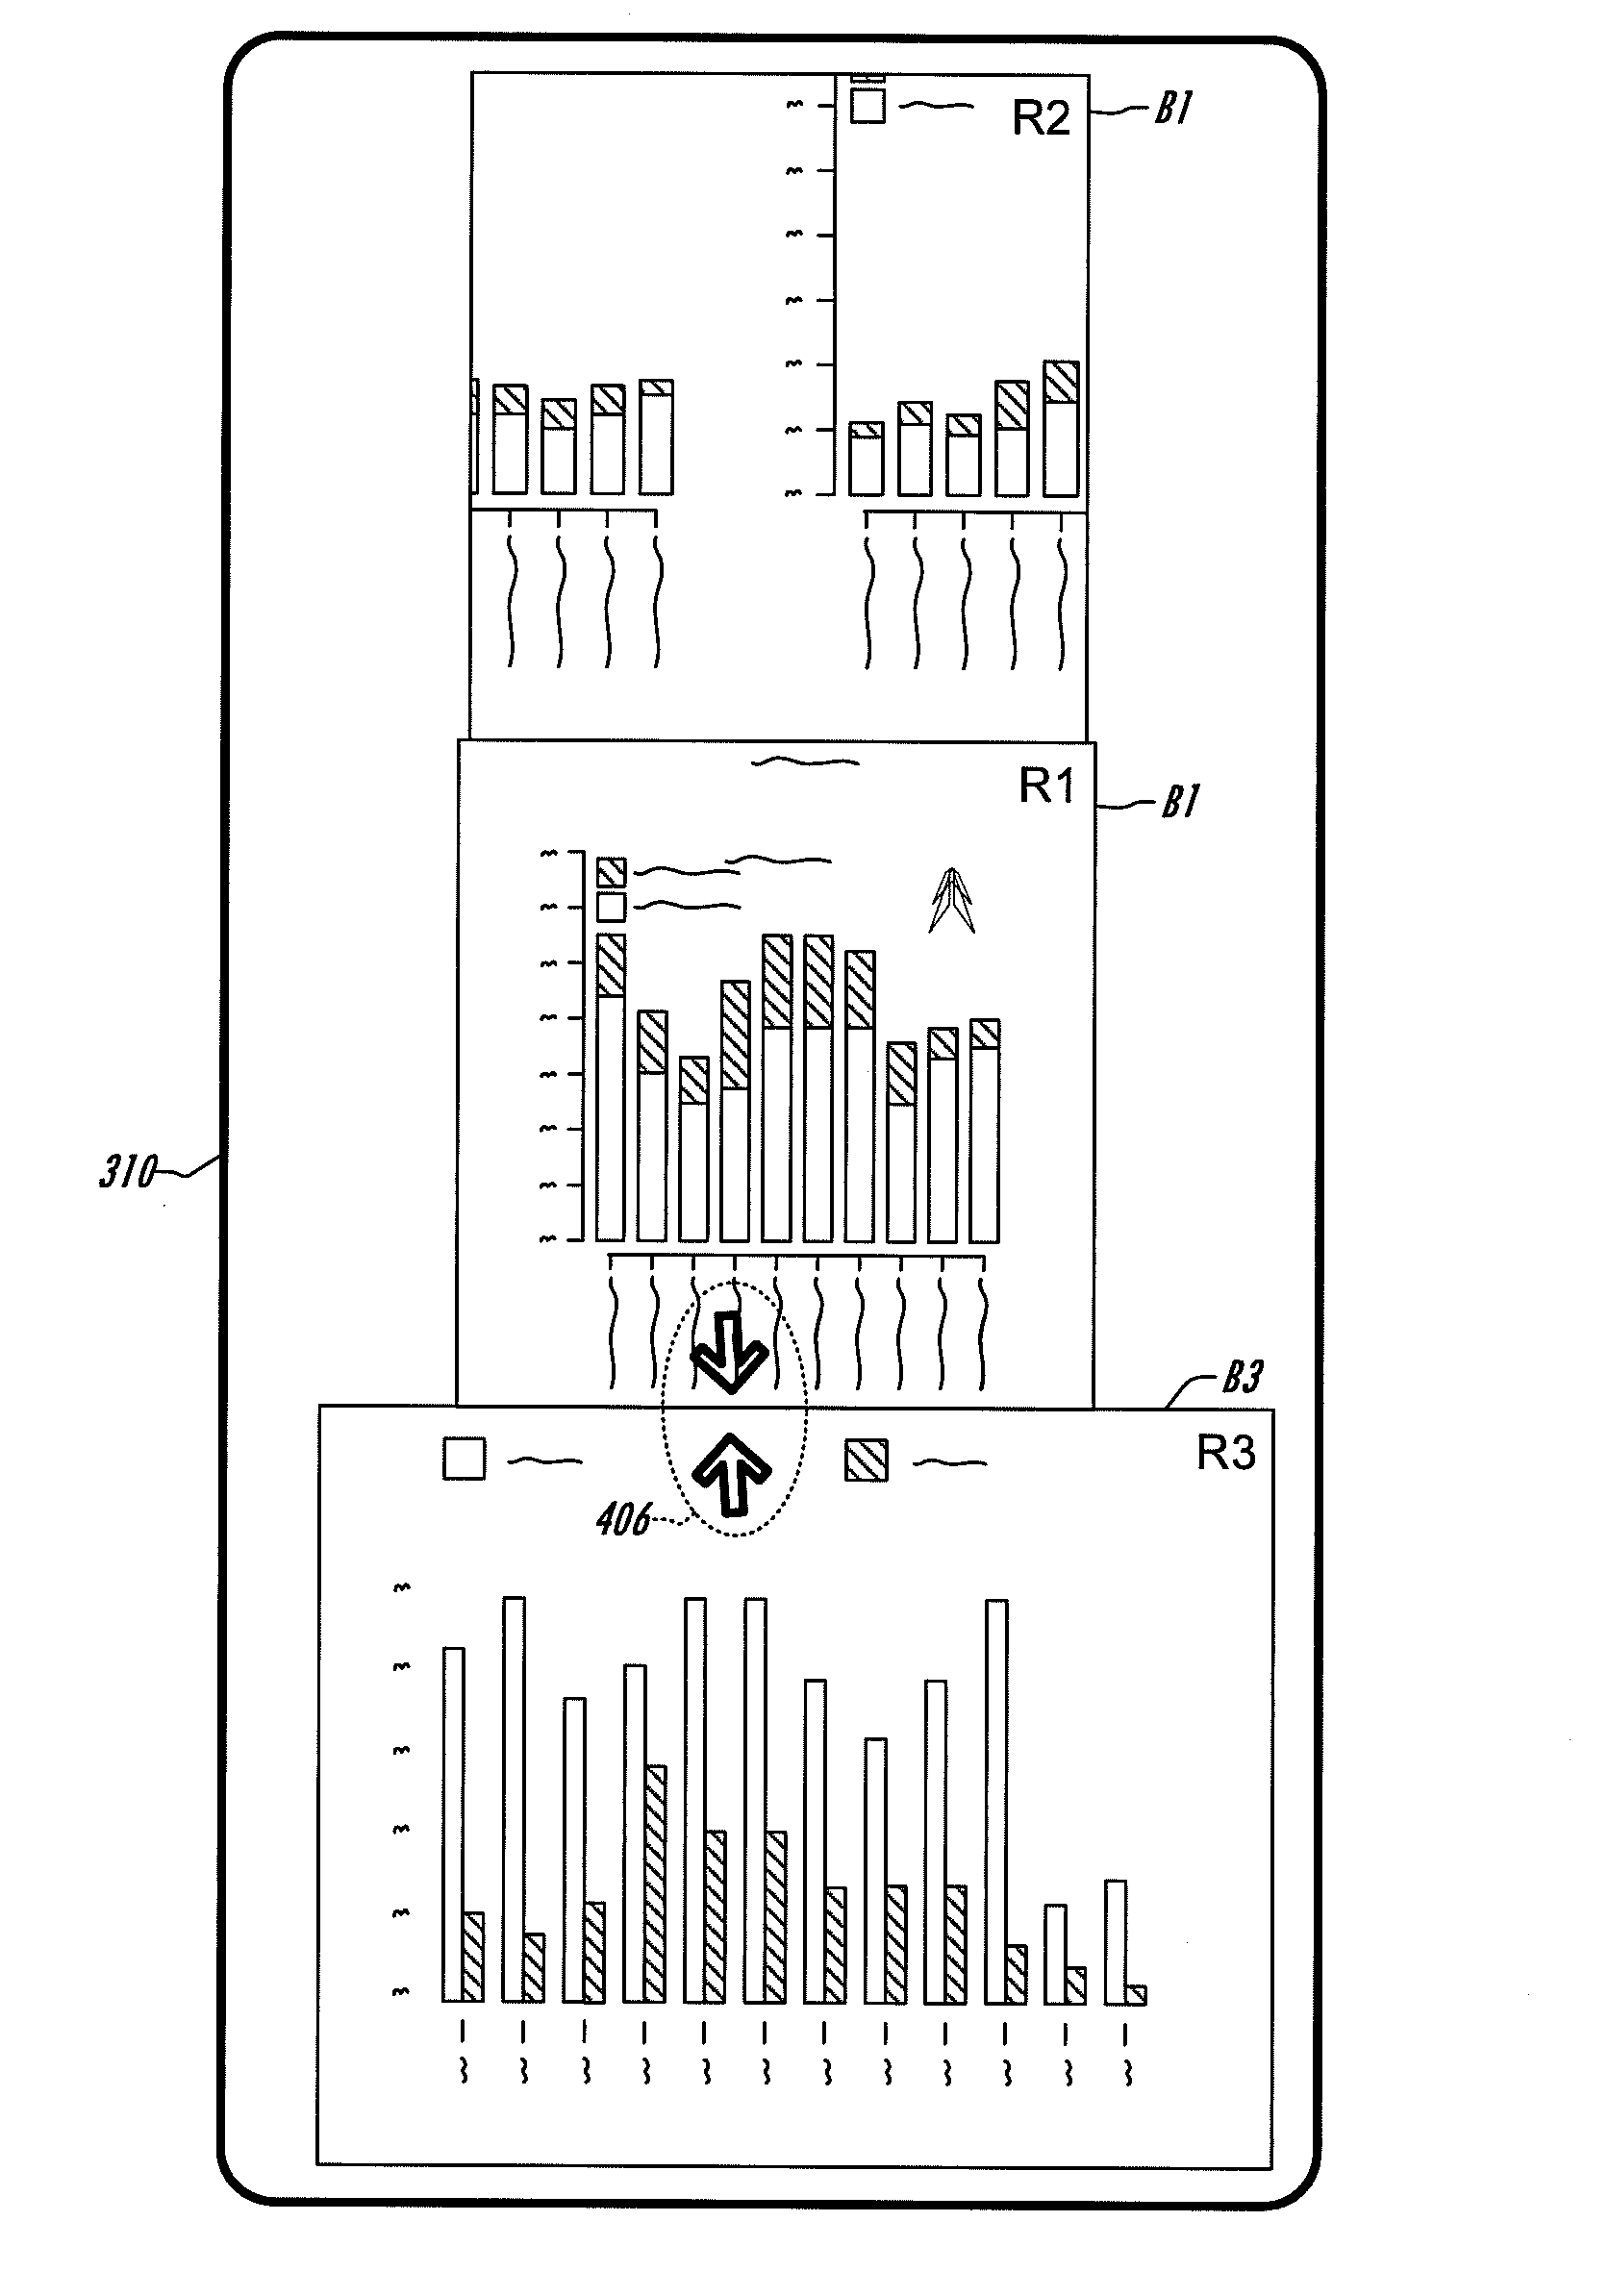 Electronic content visual comparison apparatus and method